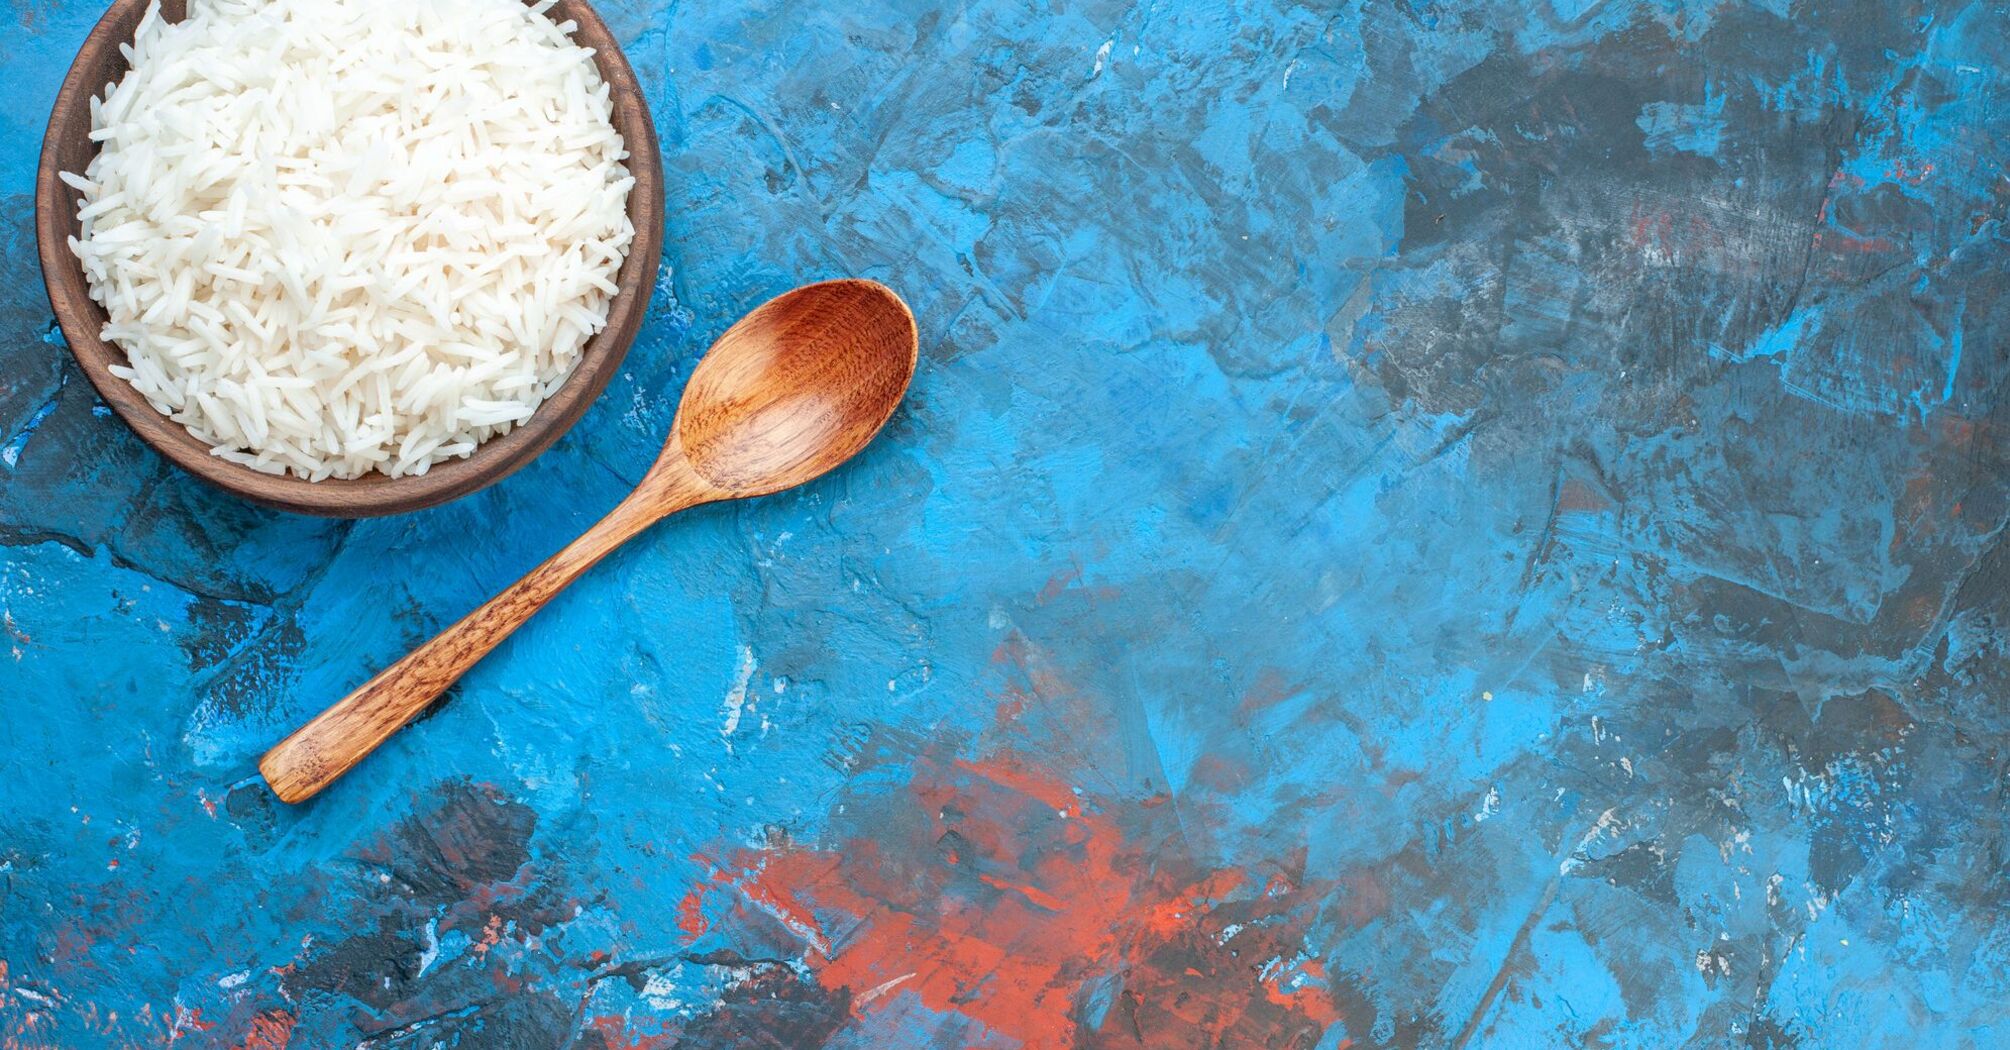 How to cook rice so that it does not stick together: life hack